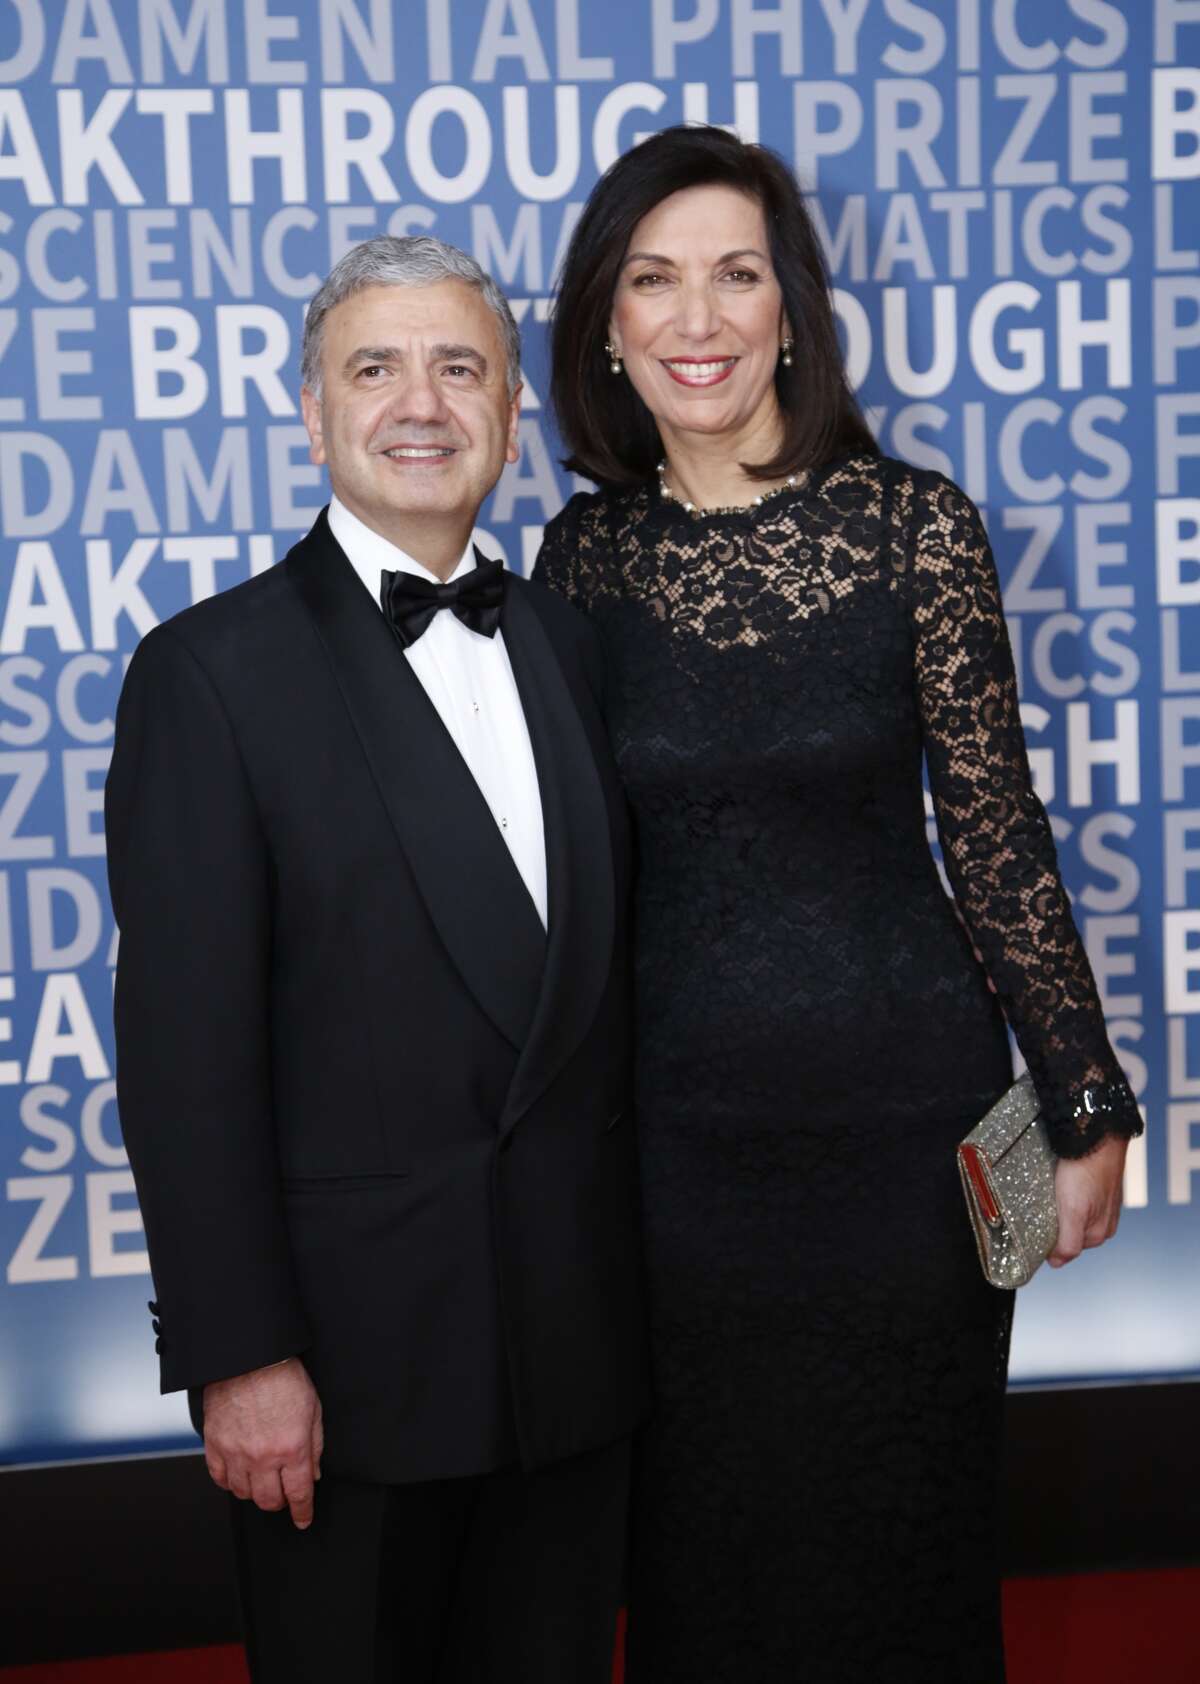 Breakthrough Prize in Life Sciences Laureate Huda Zoghbi (right) and William Zoghbi (left) attend the 2017 Breakthrough Prize at NASA Ames Research Center on December 4, 2016 in Mountain View, California.